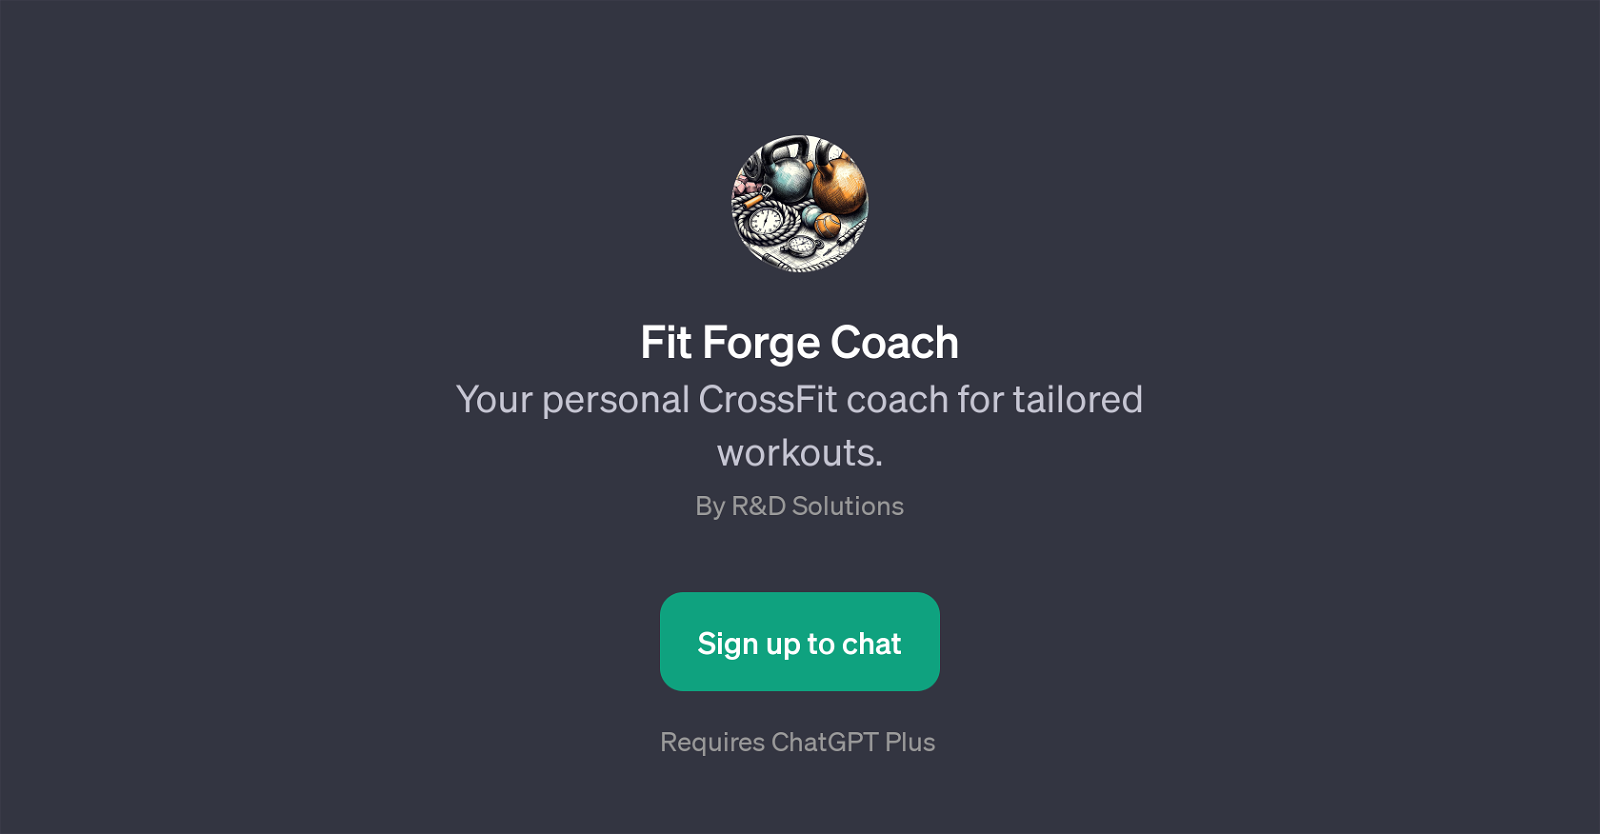 Fit Forge Coach website